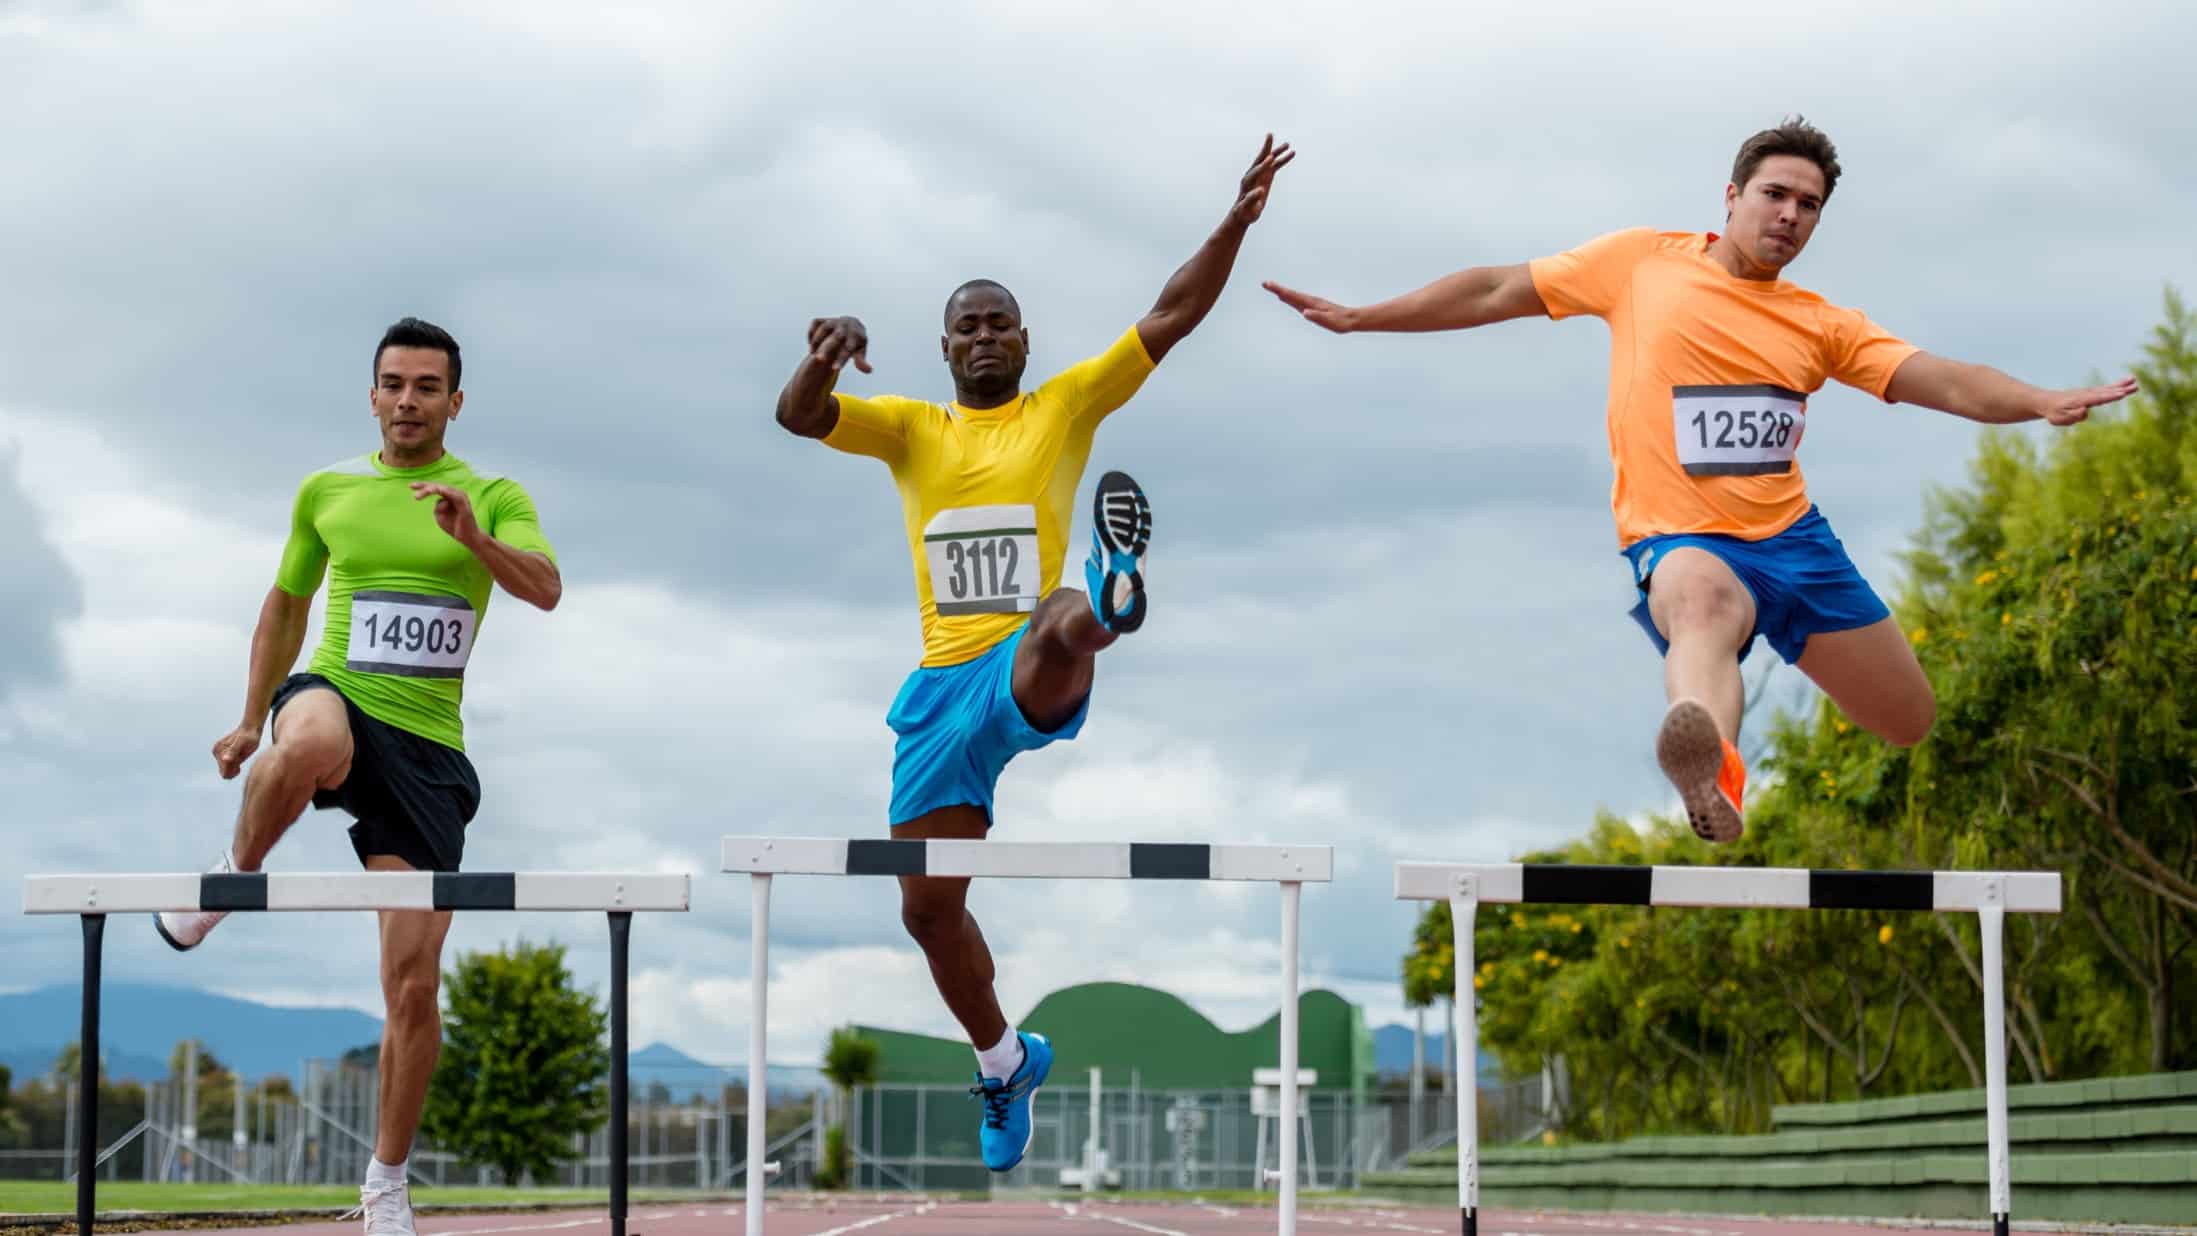 three people wearing athletic numbers and outfits jump over hurdles on a running track.